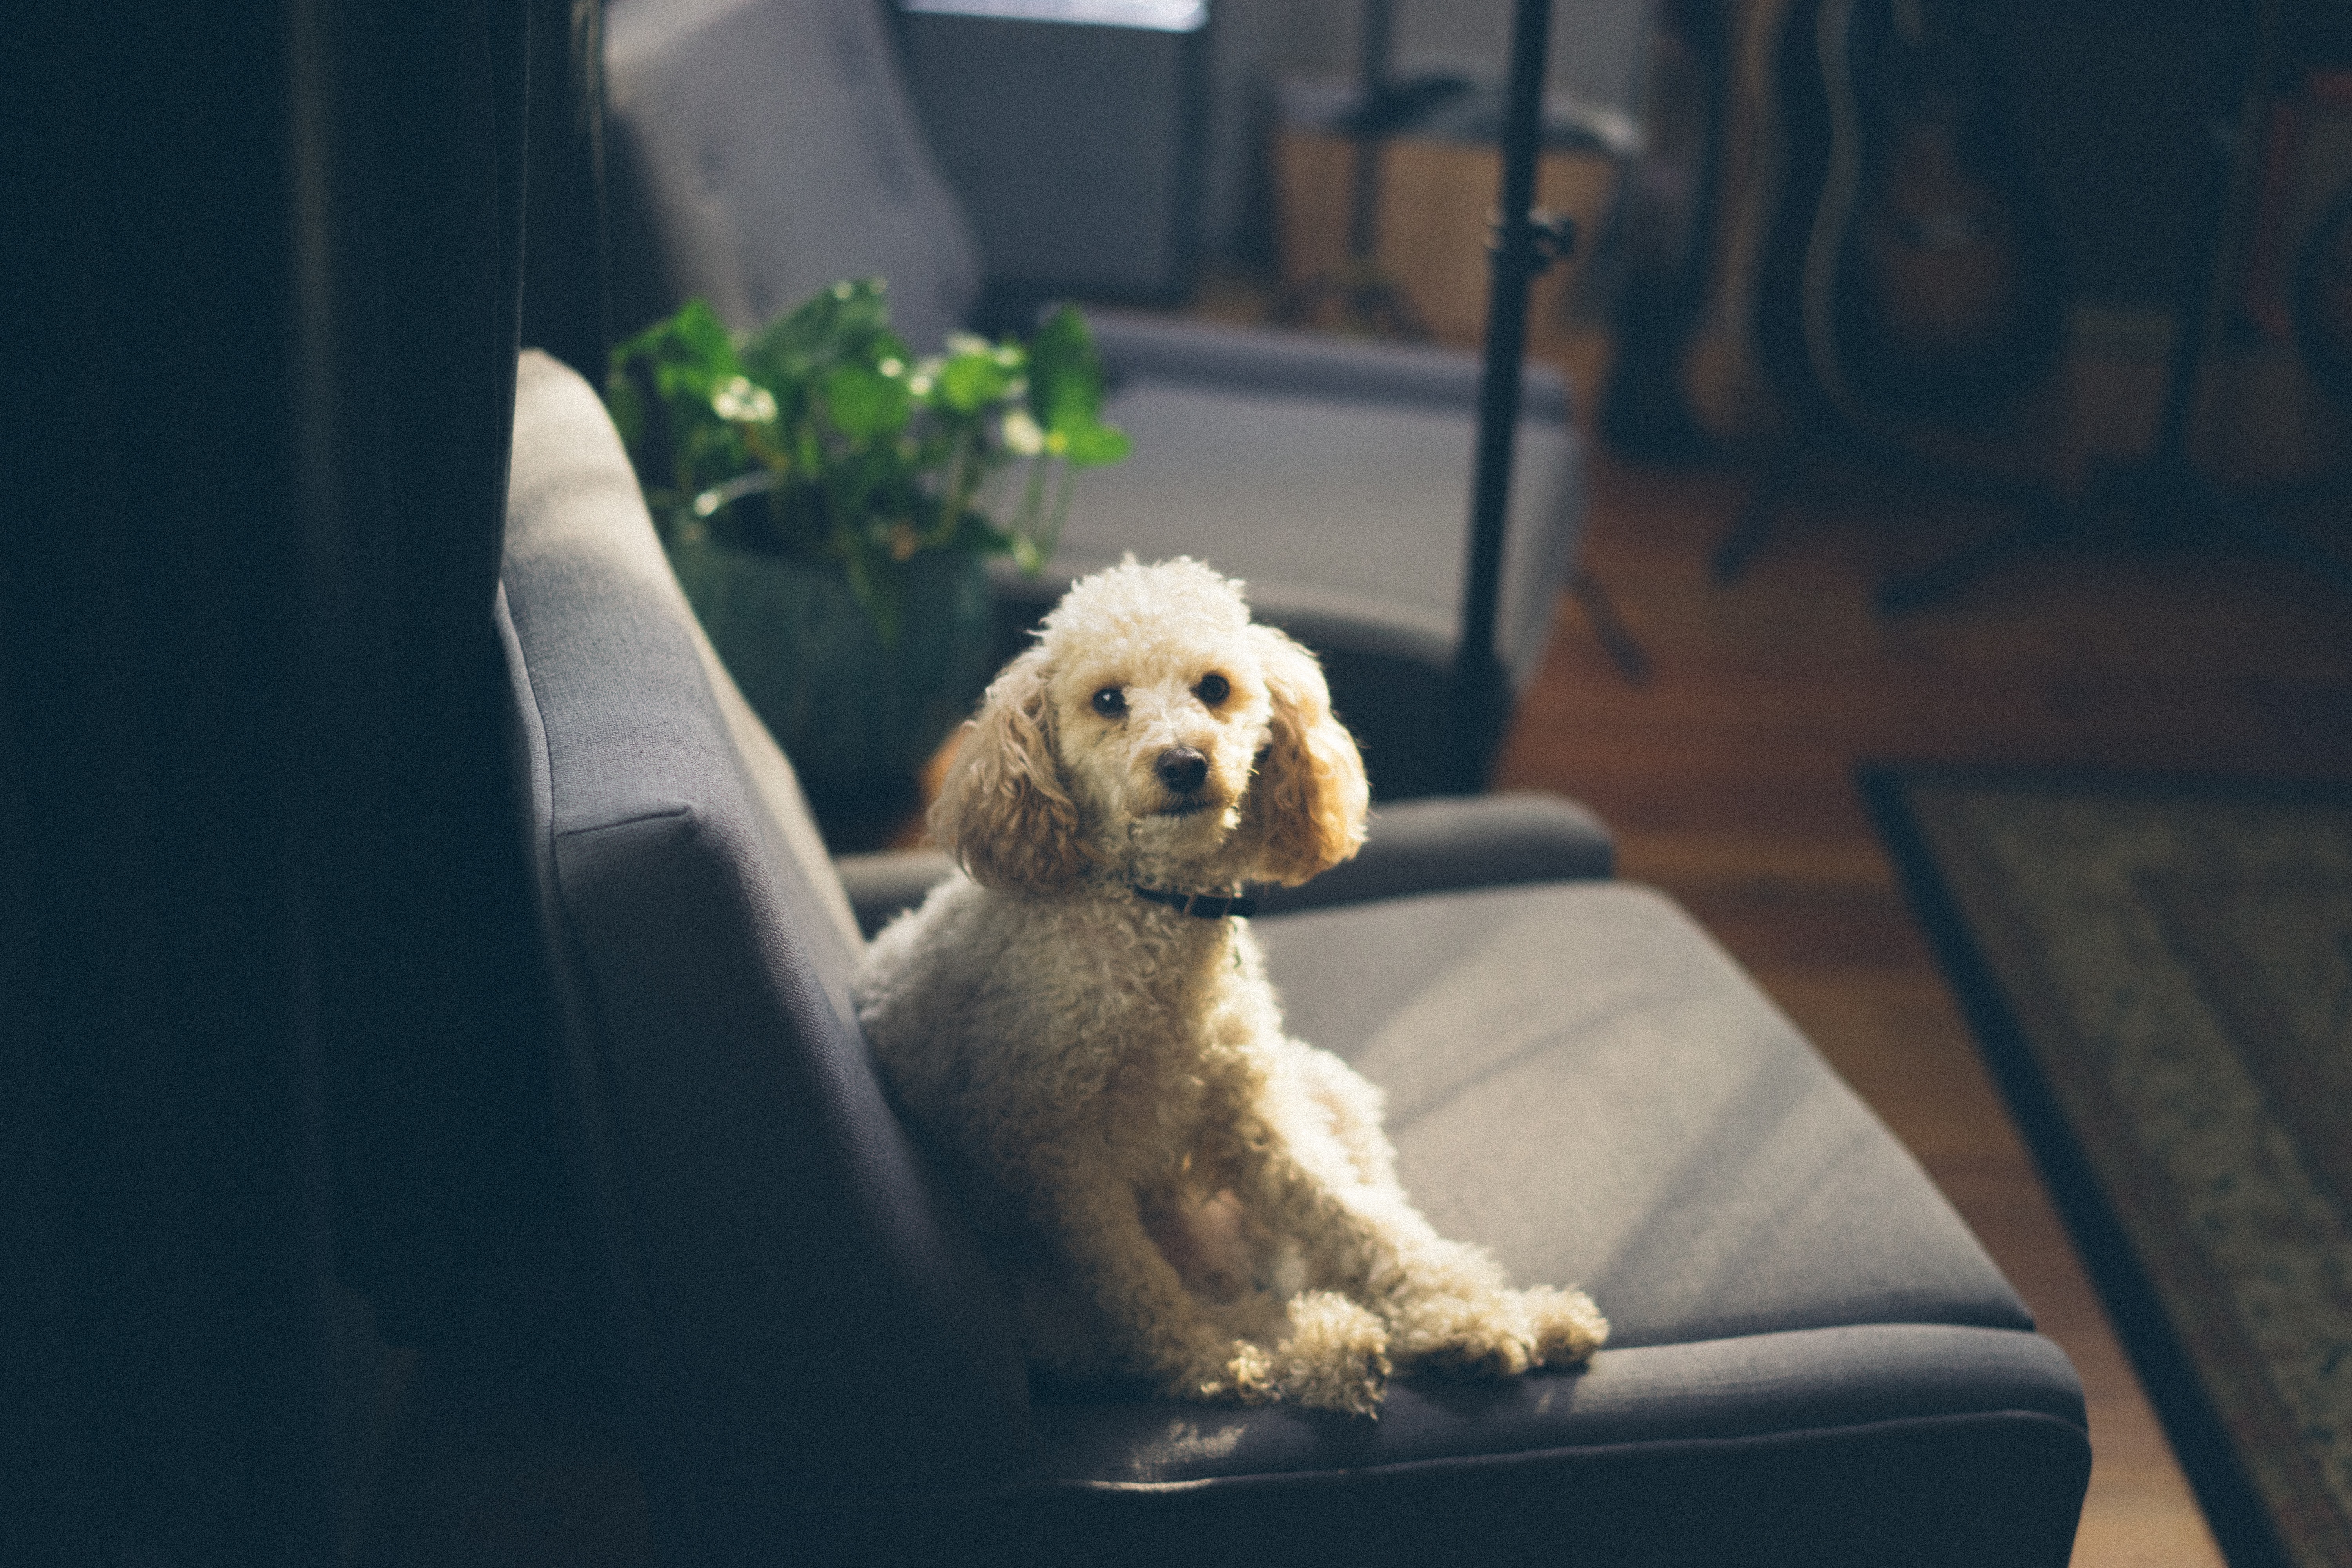 Poodle breed dog sitting on couch with indoor plant behind them